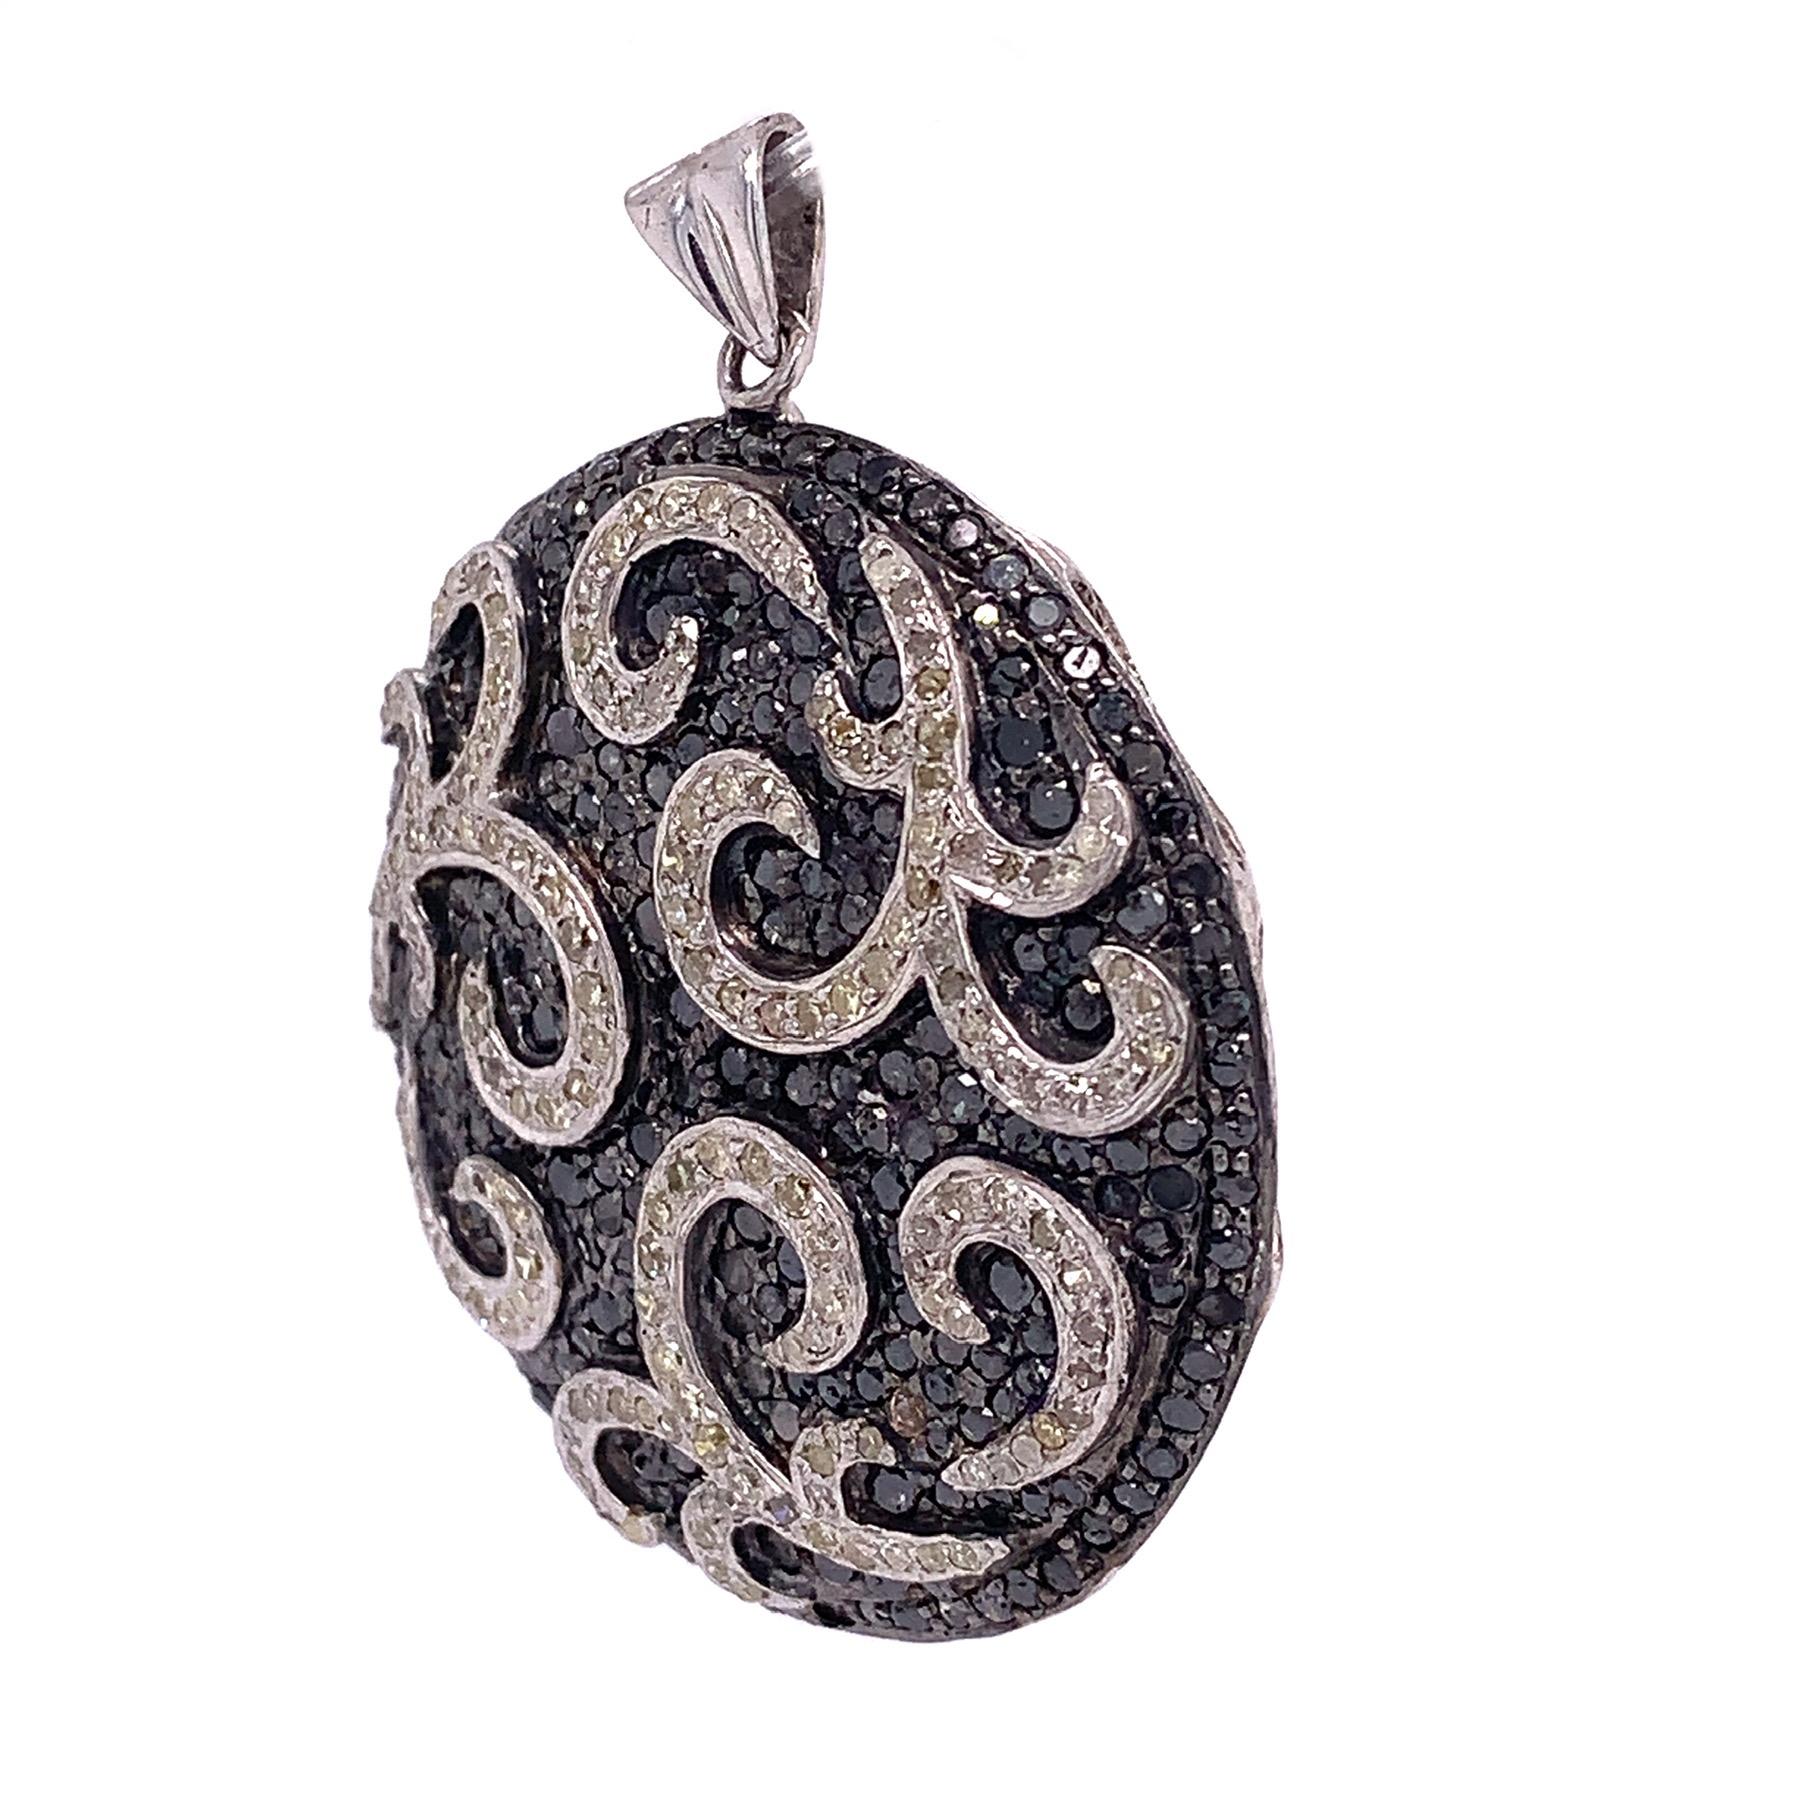 Life in color Collection

Combination of Black and White Diamond grotesque pendant set in Sterling Silver plated.

Black Diamond: 3.30ct total weight.
Diamond: 1.01ct total weight.
